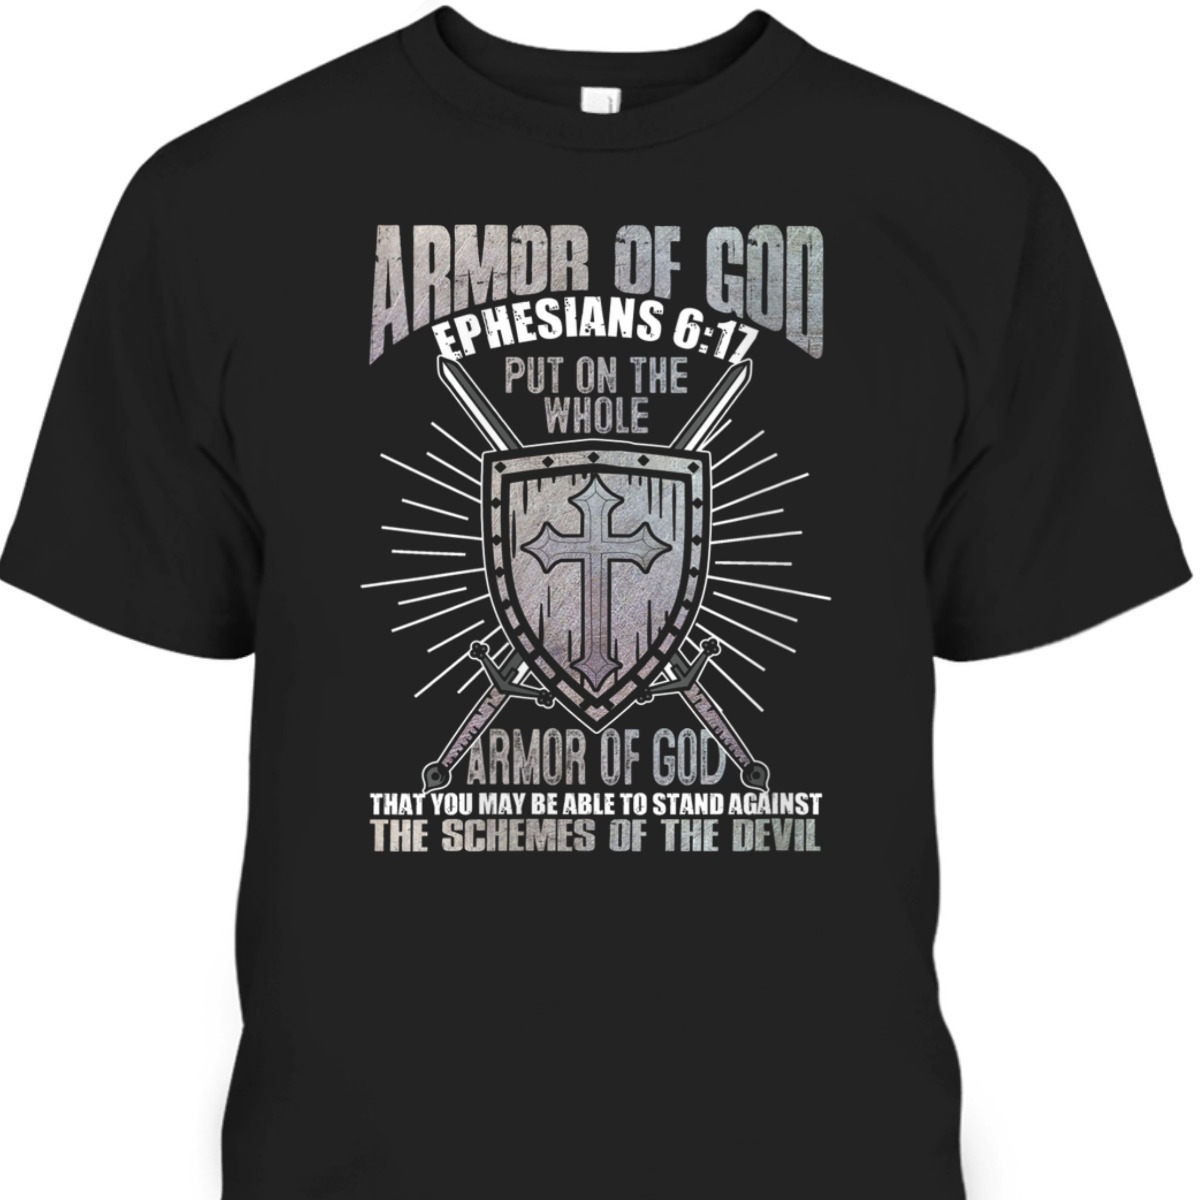 The Full Armor Of God T-Shirt Ephesians 617 Stand Against The Schemes Of The Devil